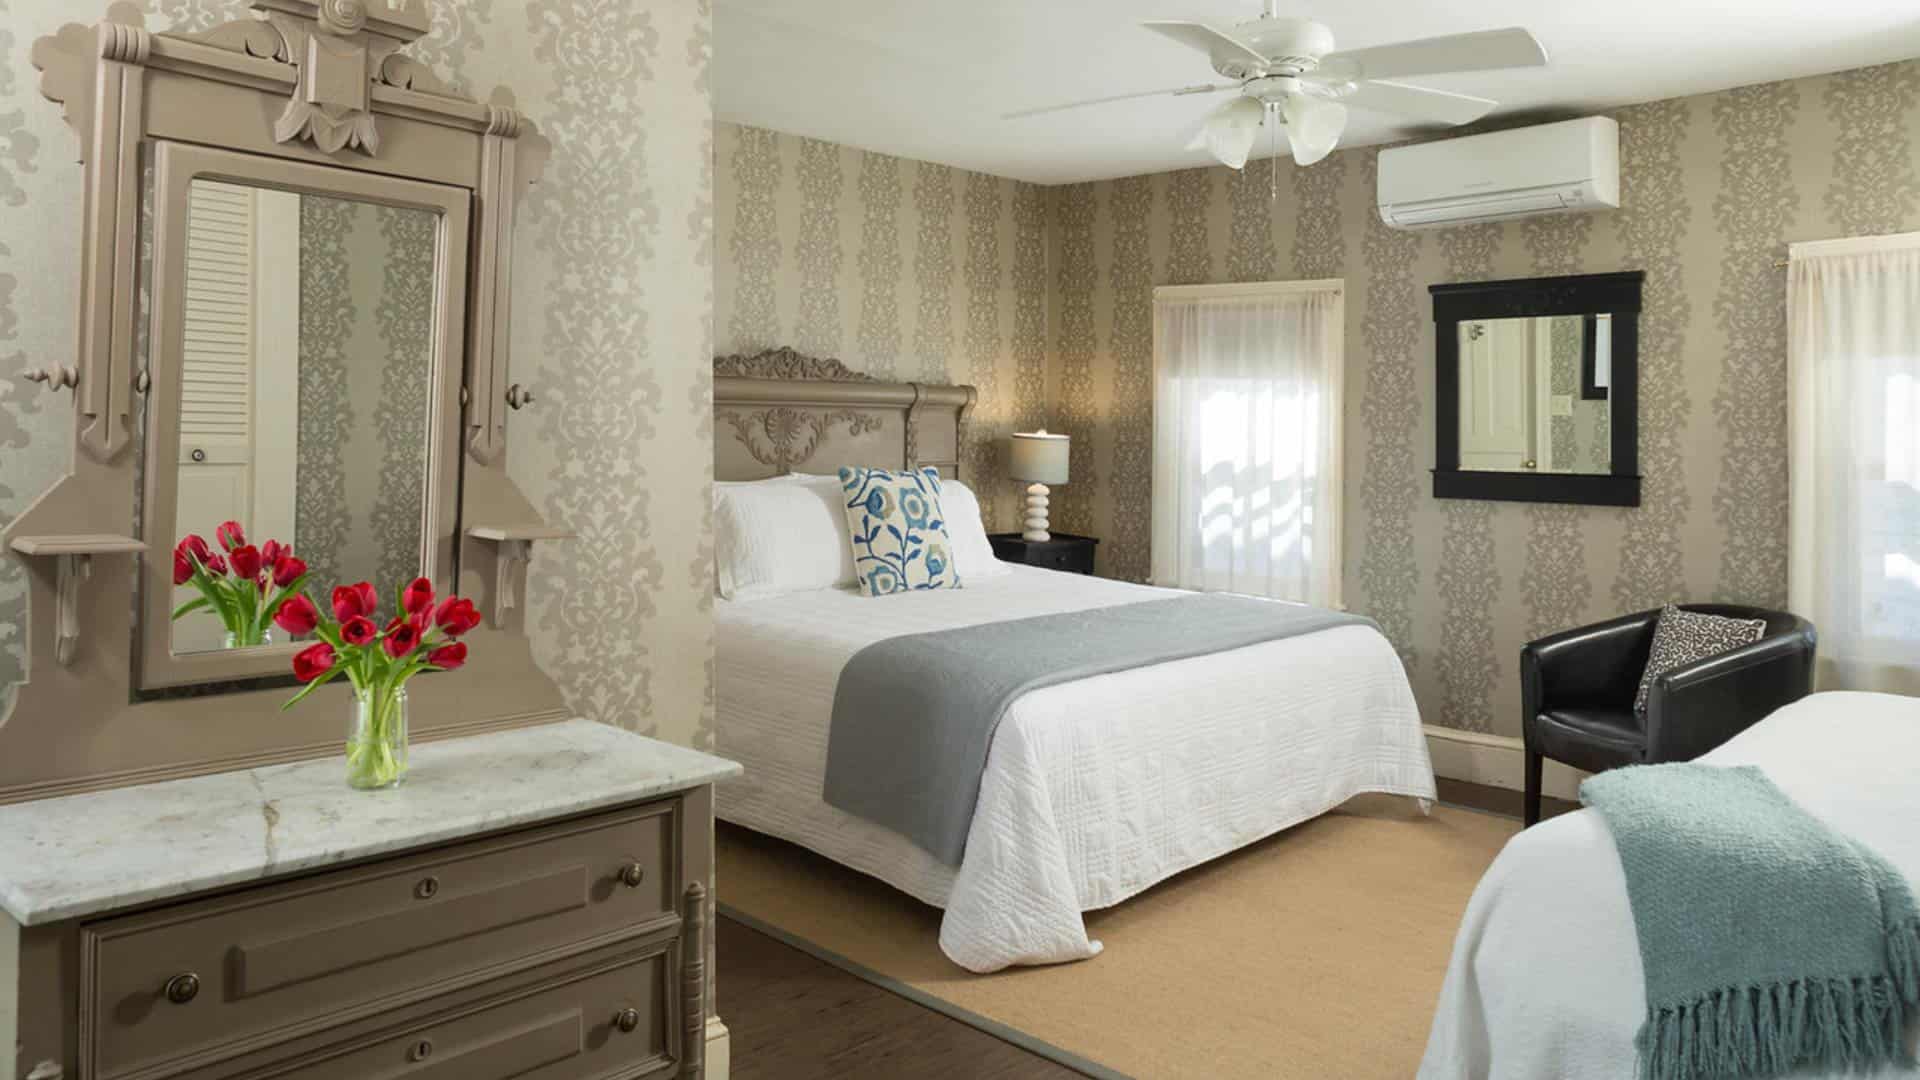 Large bedroom with gray wooden ornate headboard, matching dresser with marble top and mirror, white bedding, hardwood flooring, and brocade wallpaper